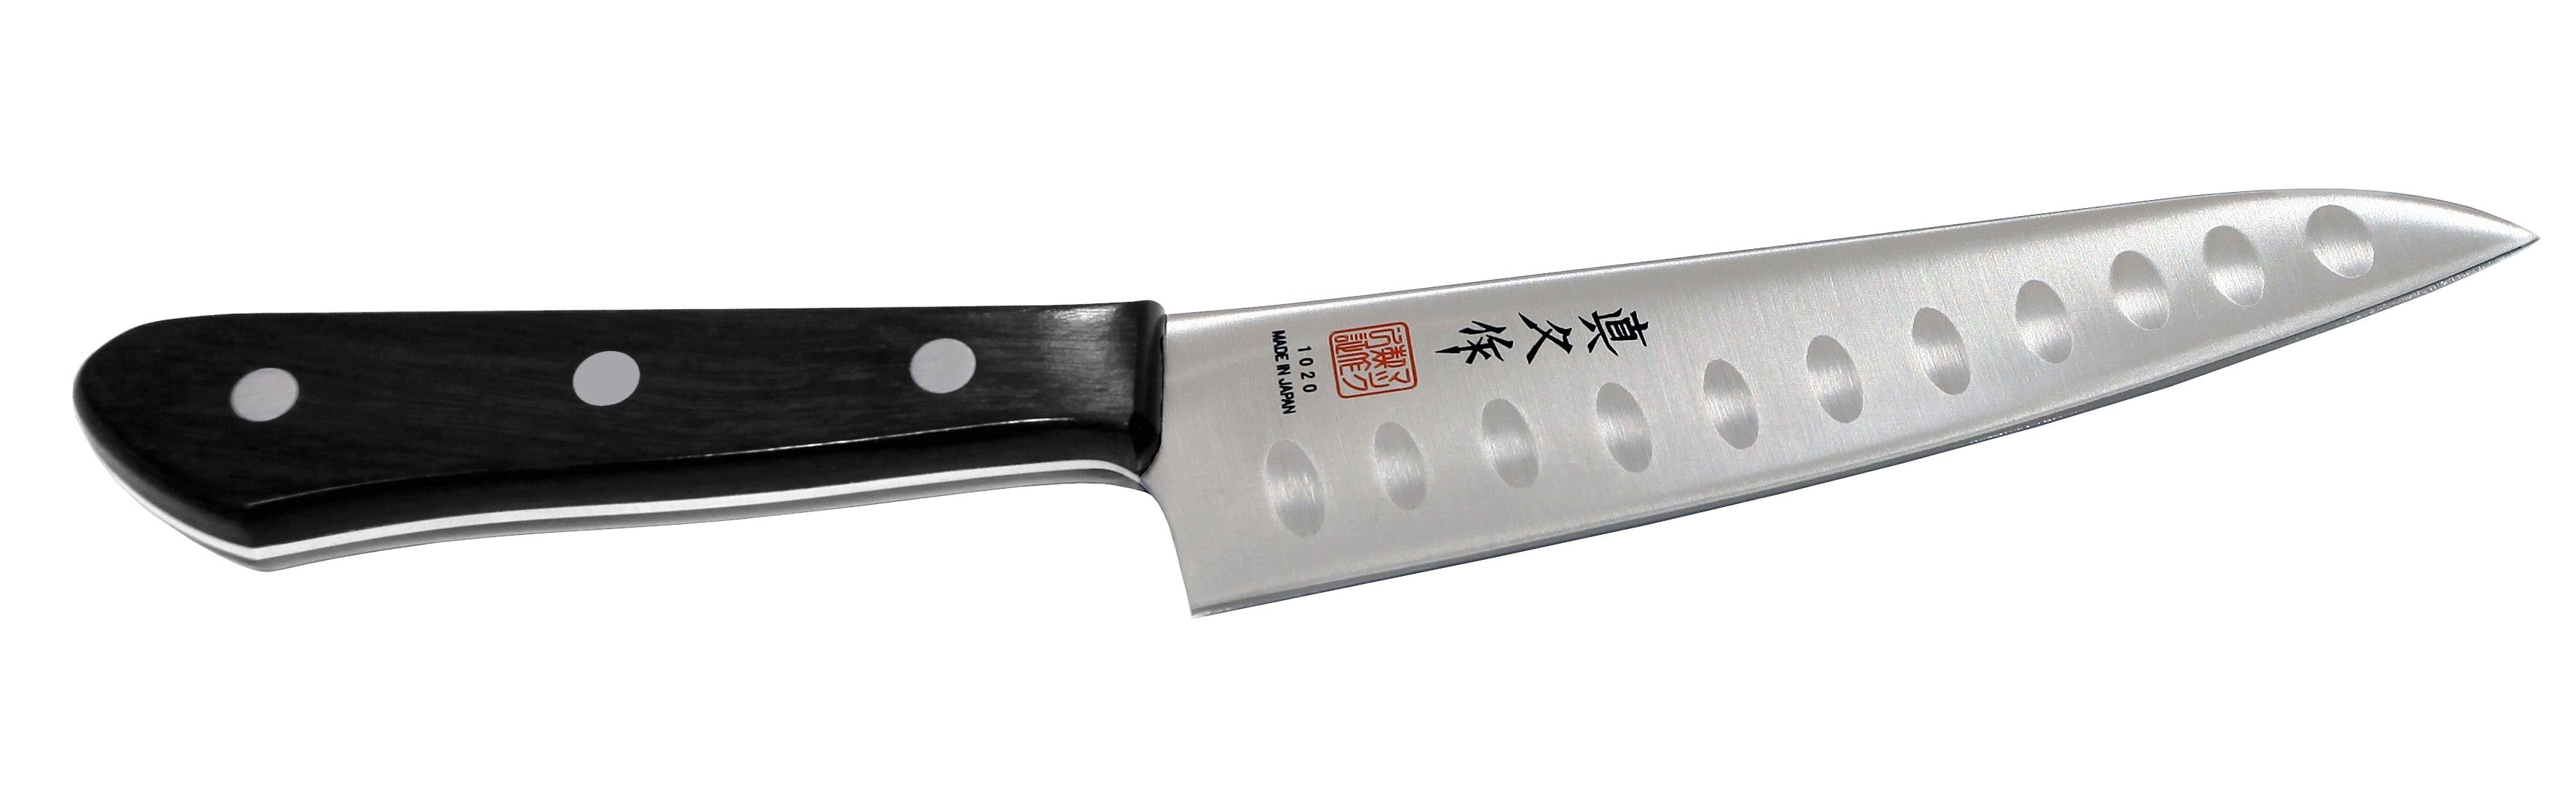 mac knife th-80 series hollow edge chef's knife, 8-inch, 8 inch